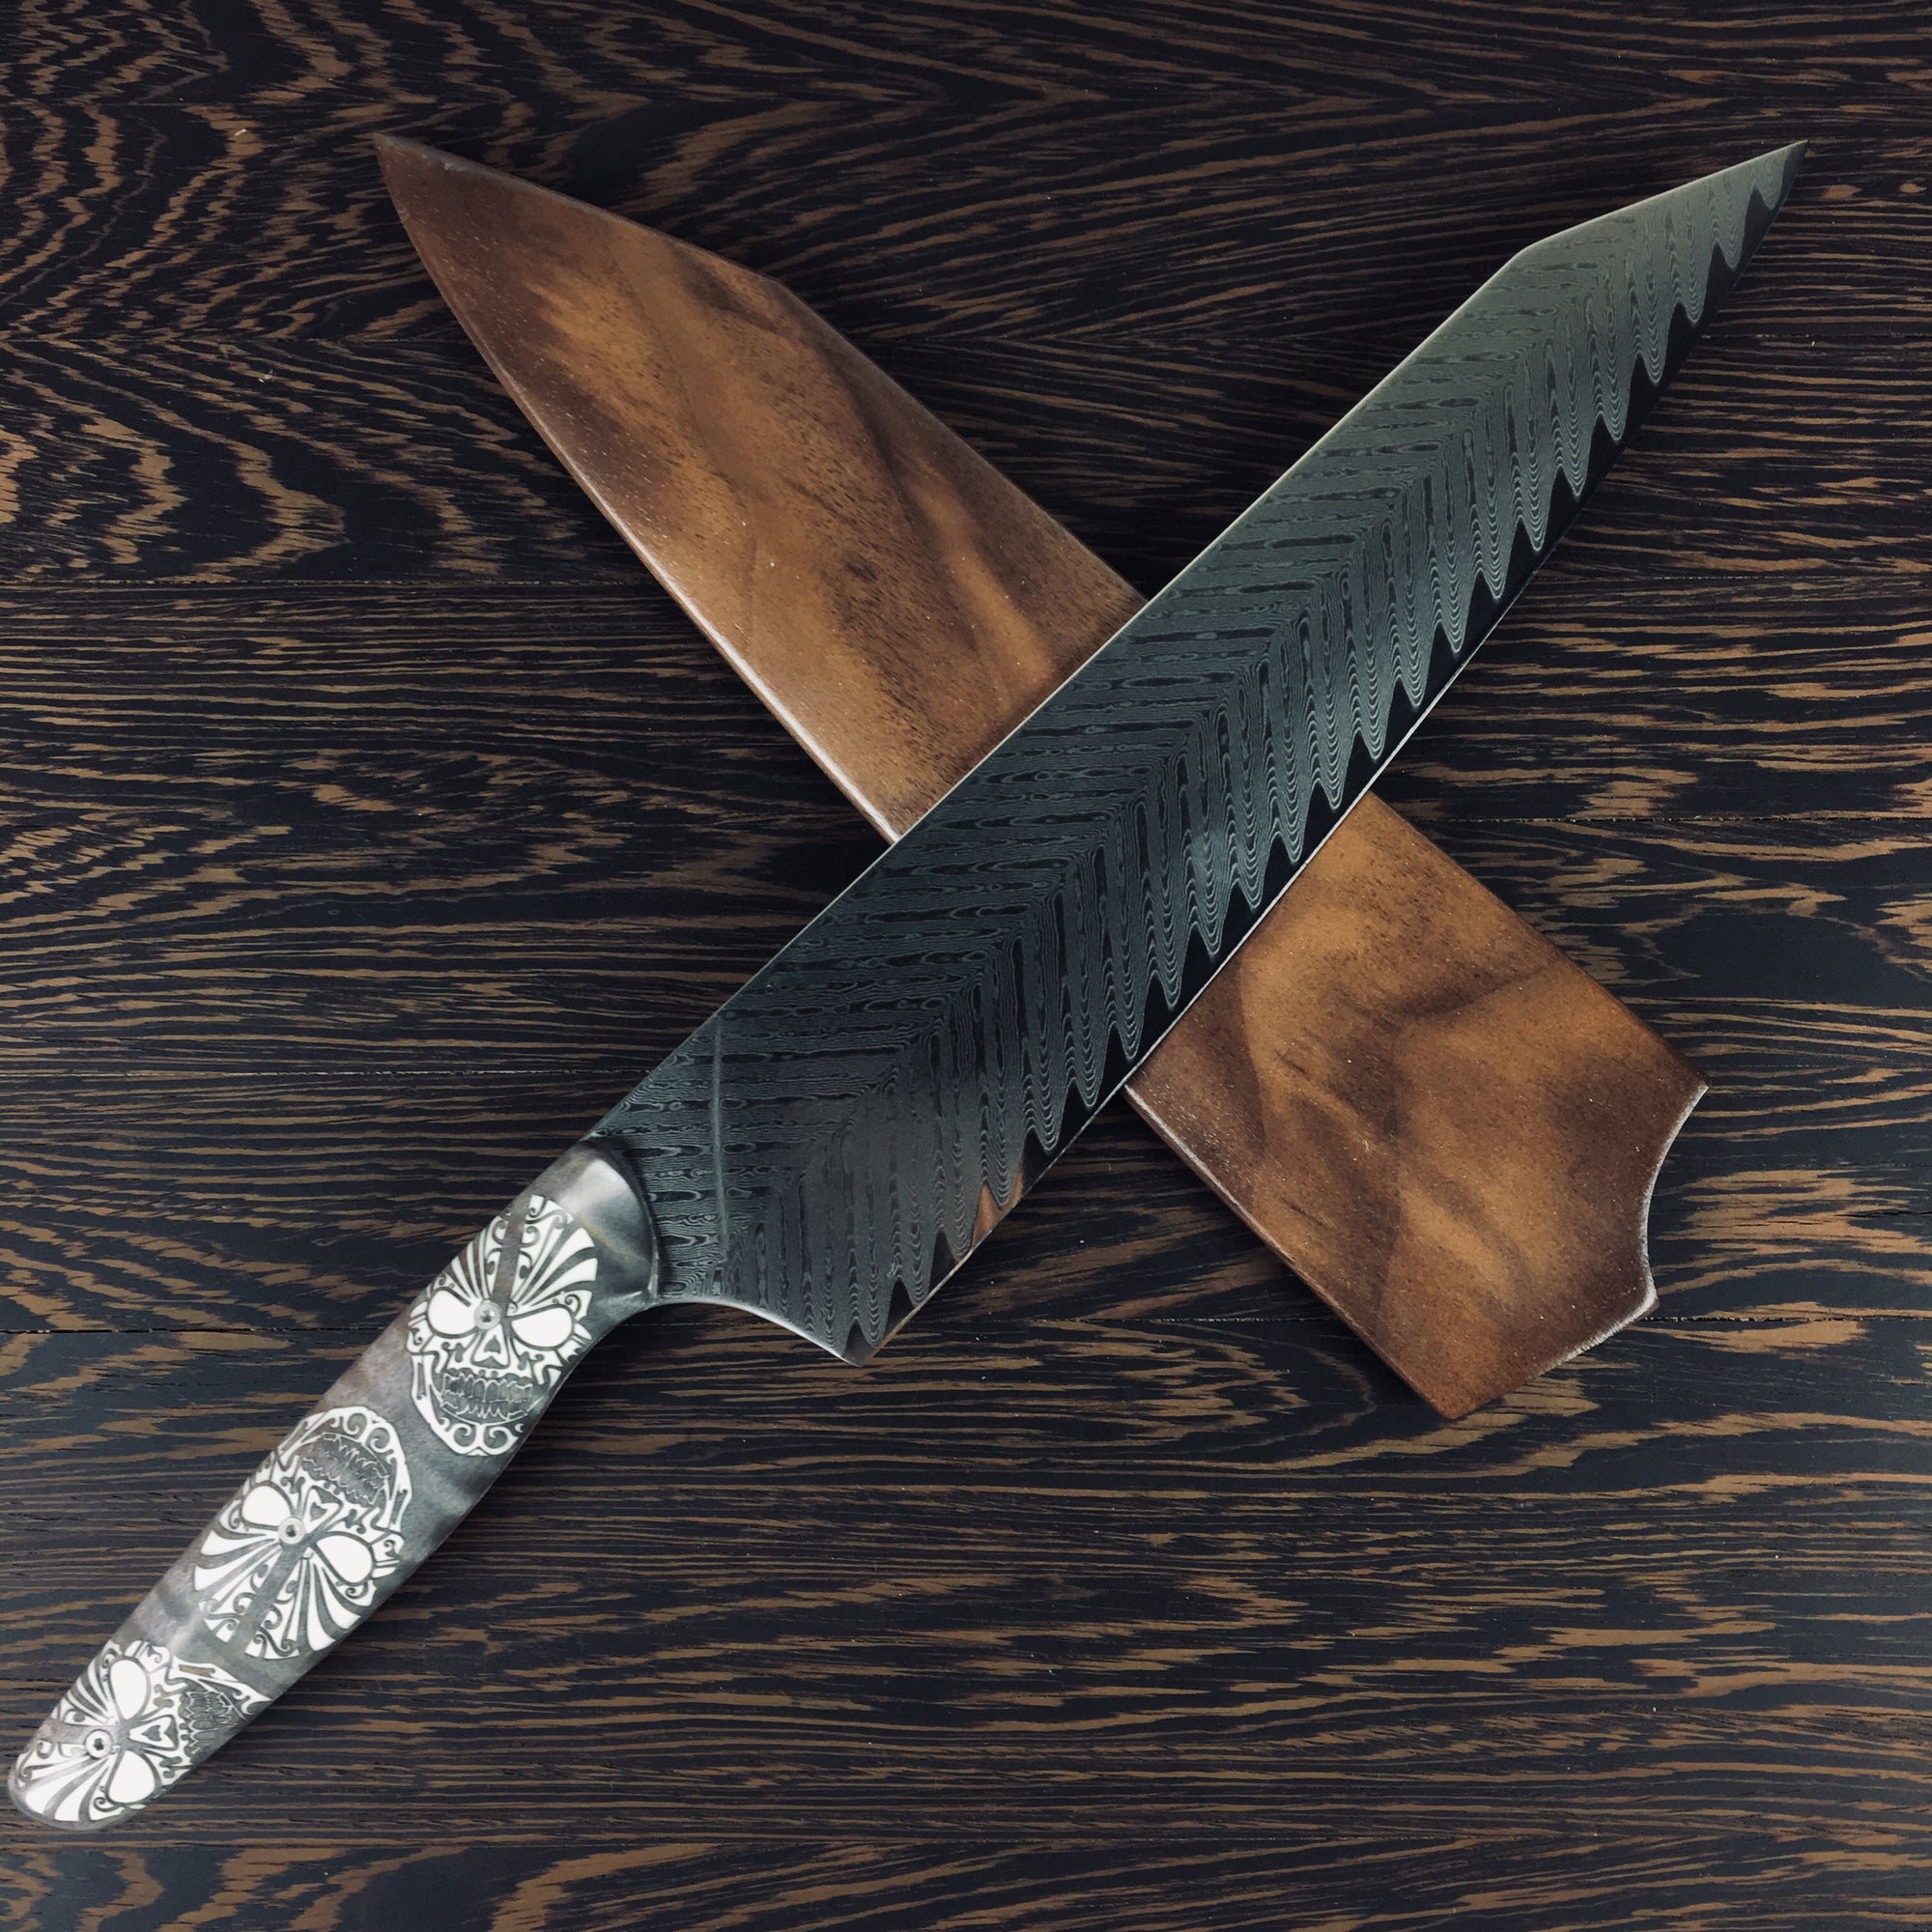 Dr Jekyll y Señor Hyde - Gyuto K-tip 10in Chef's Knife - Bone Saw Damascus